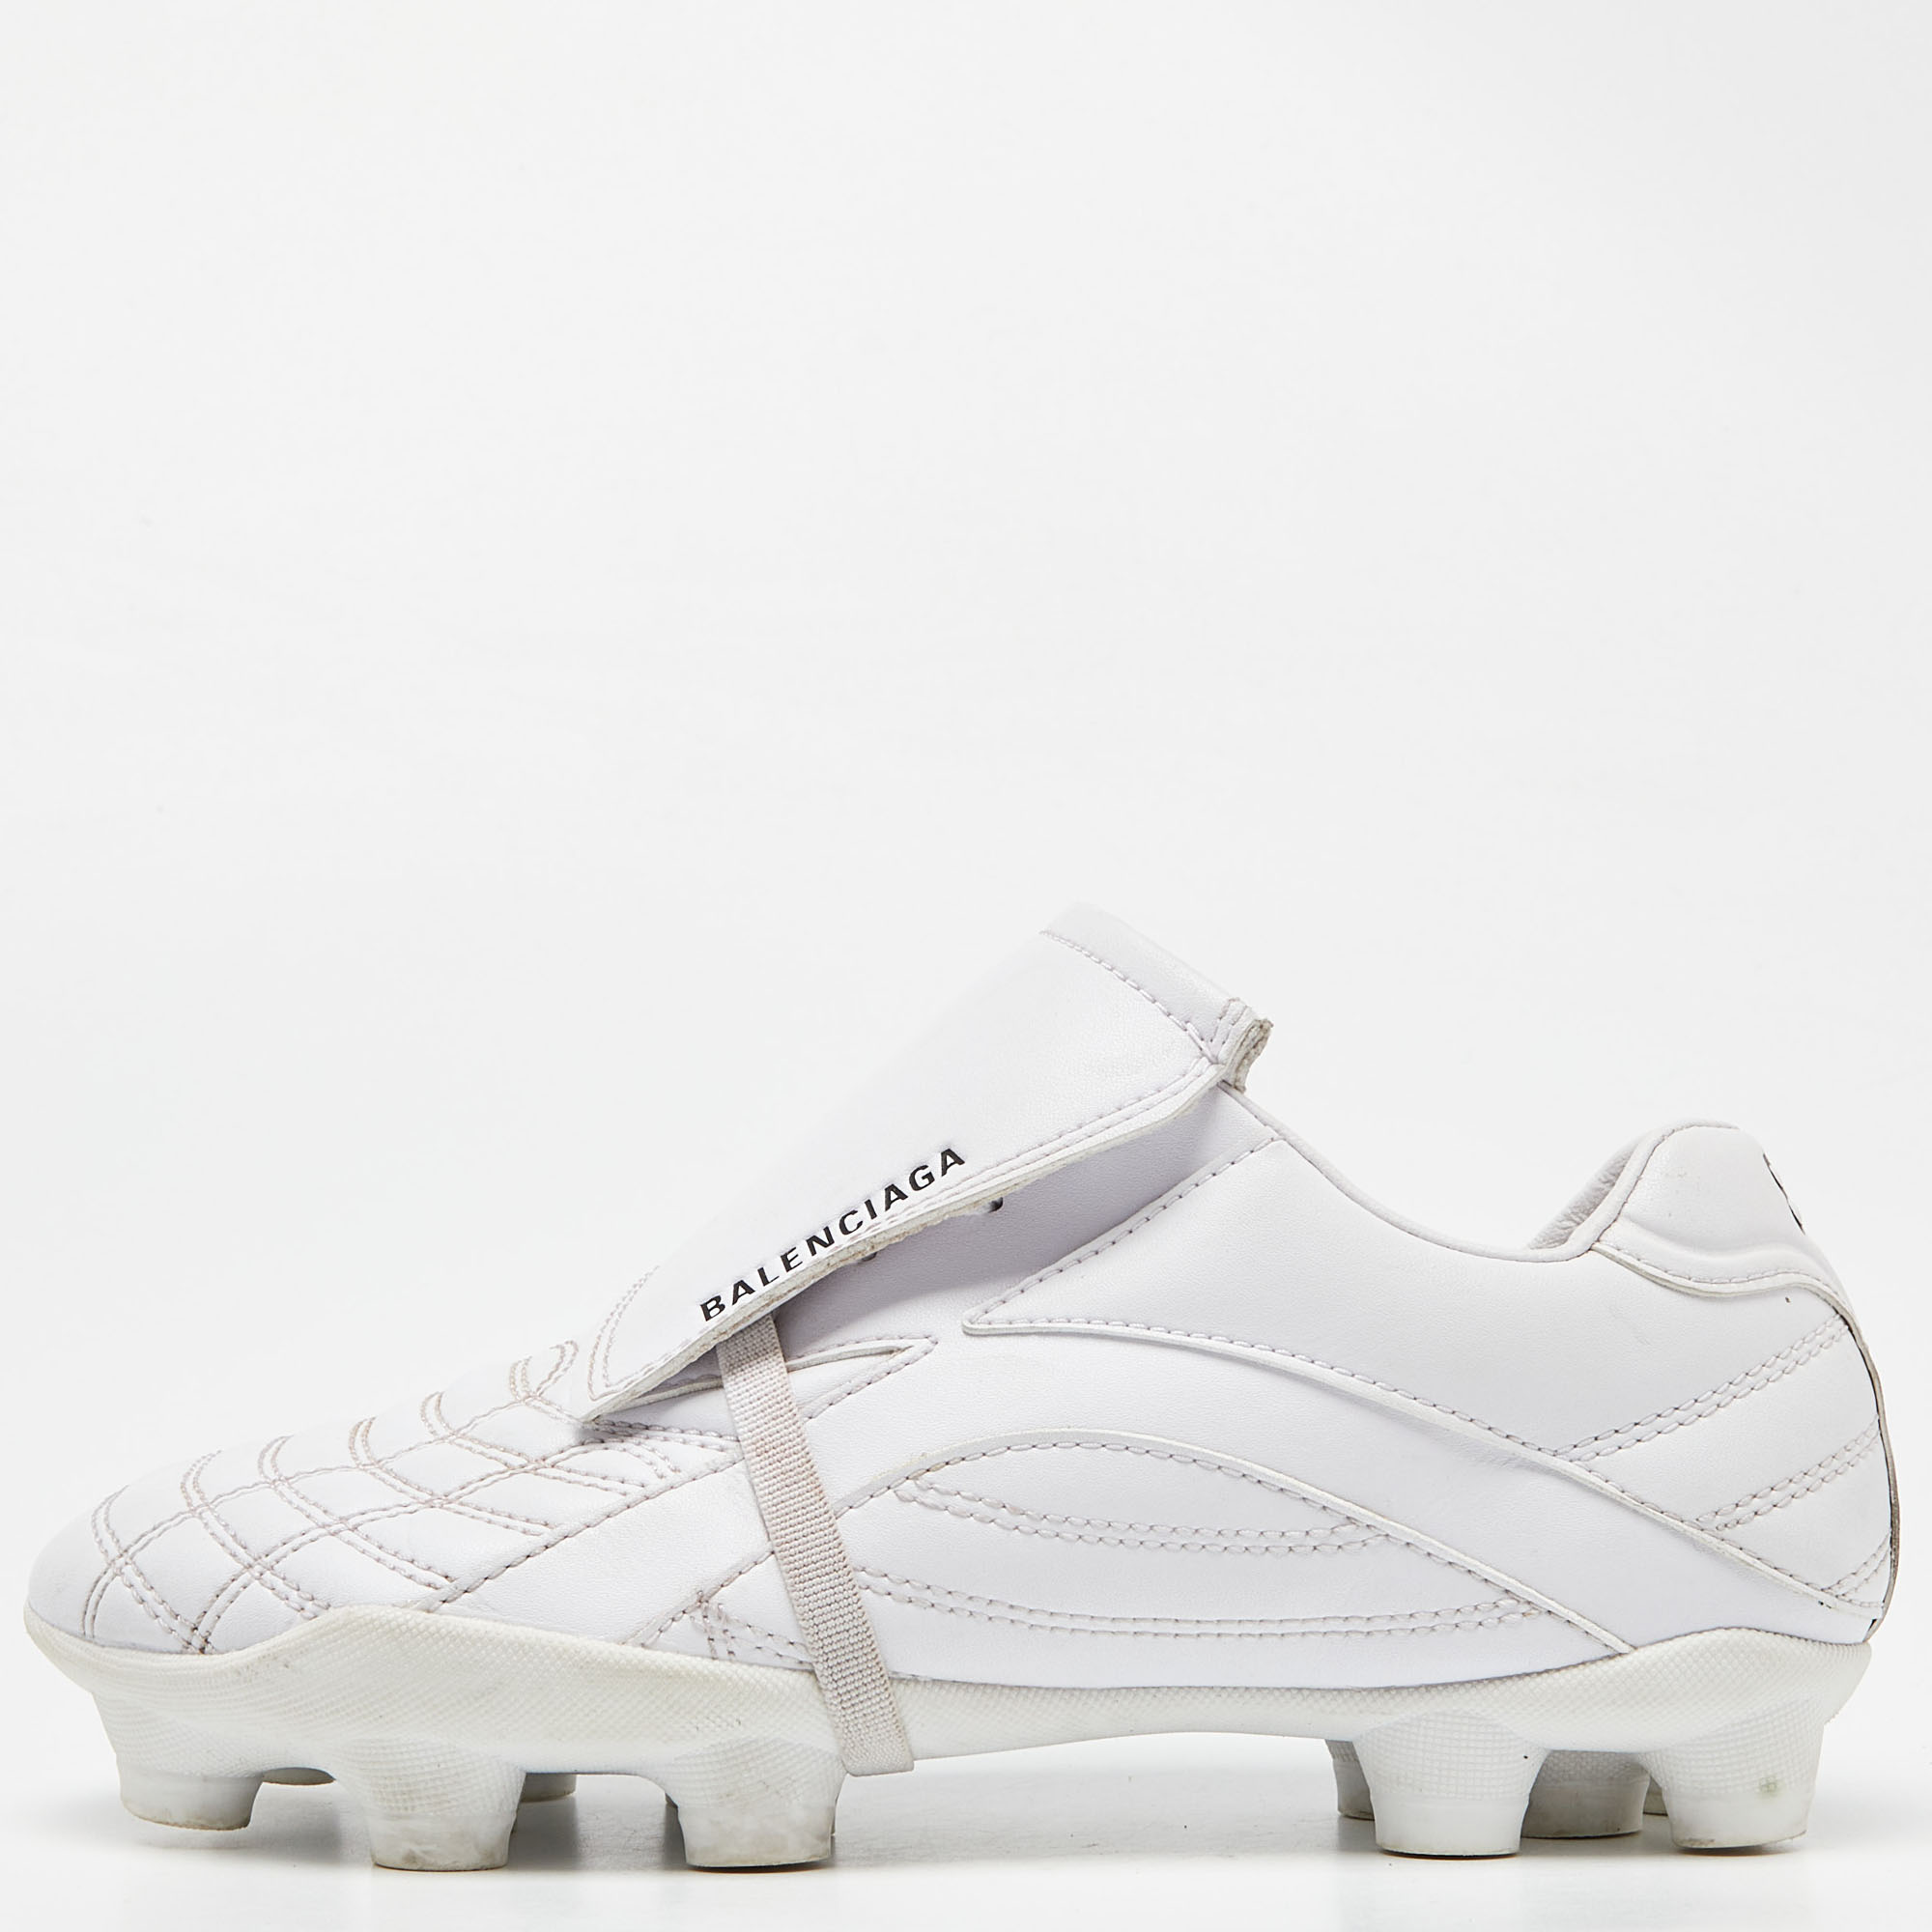 Balenciaga white faux leather soccer low top sneakers size 35